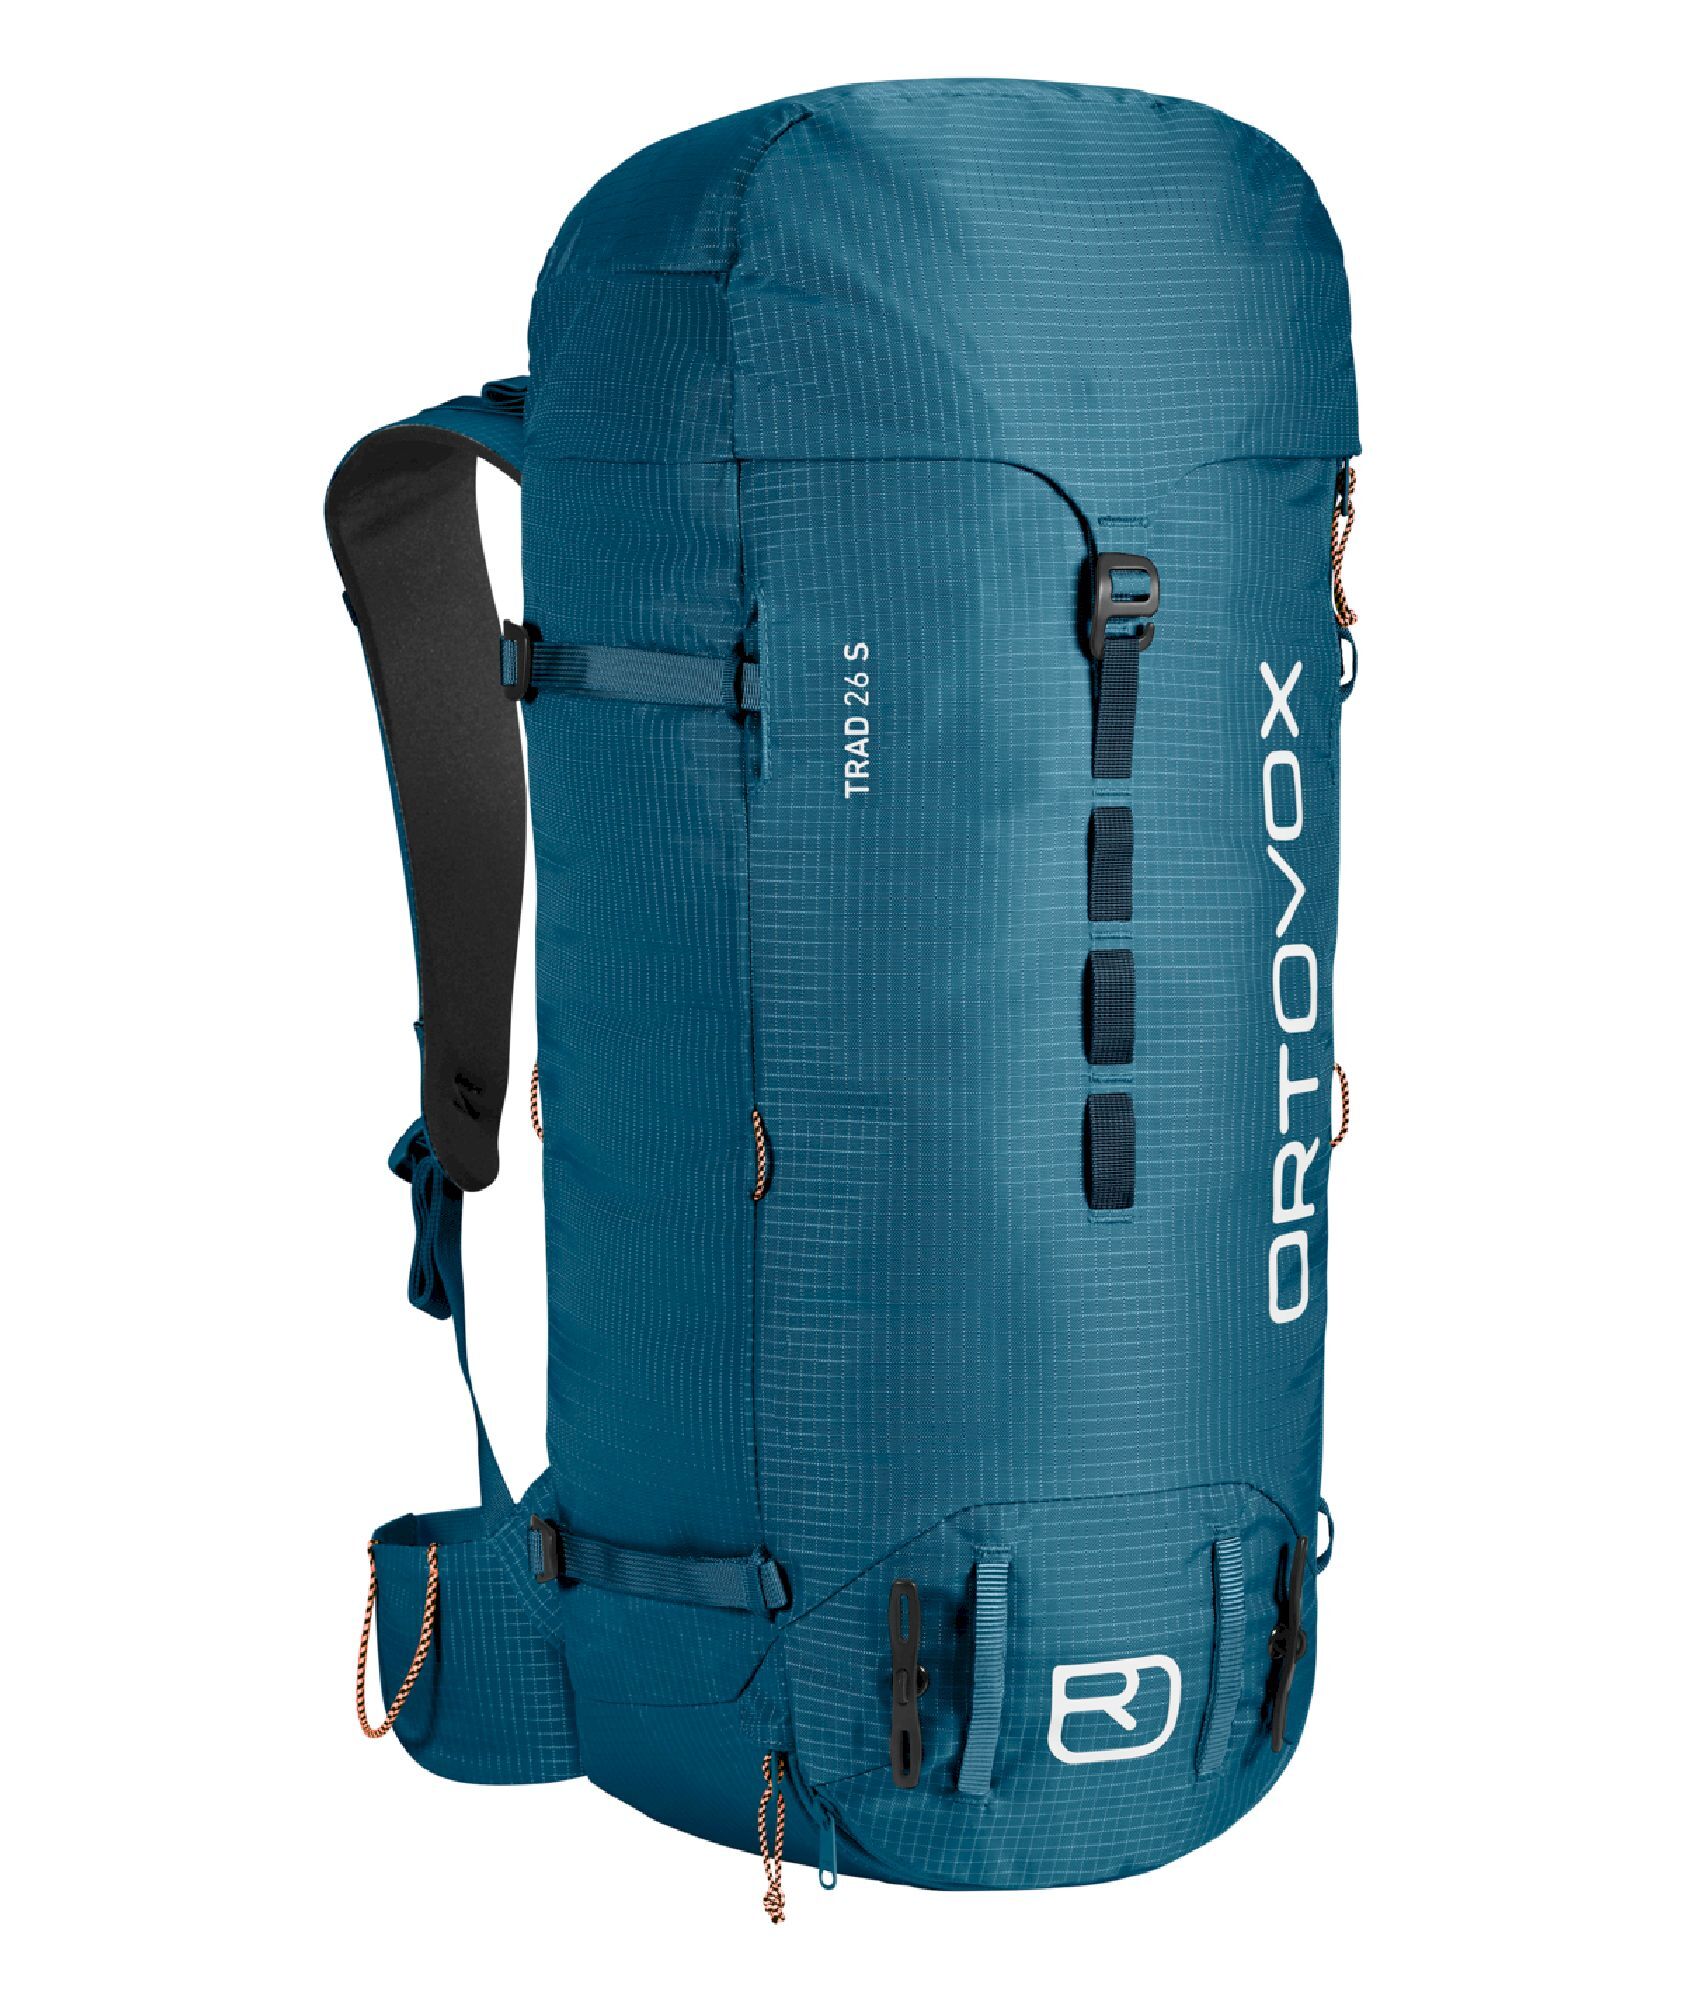 Ortovox Trad 26 S - Climbing backpack